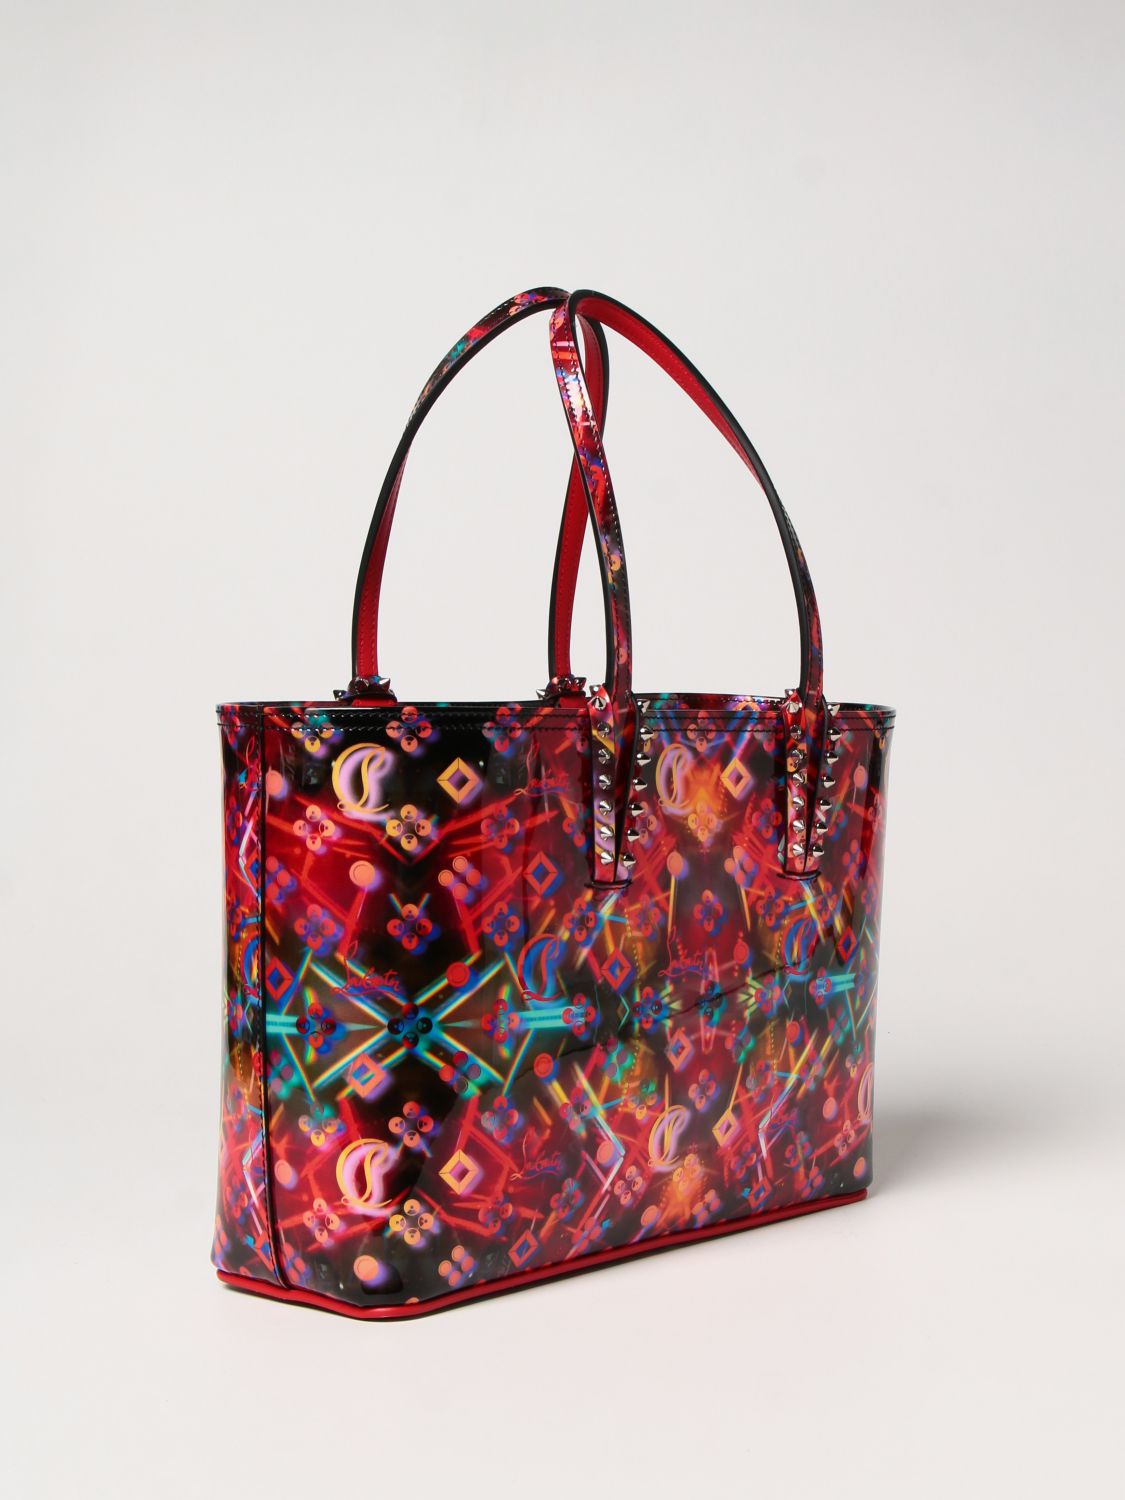 CHRISTIAN LOUBOUTIN: Cabata patent leather bag with discolaser print ...